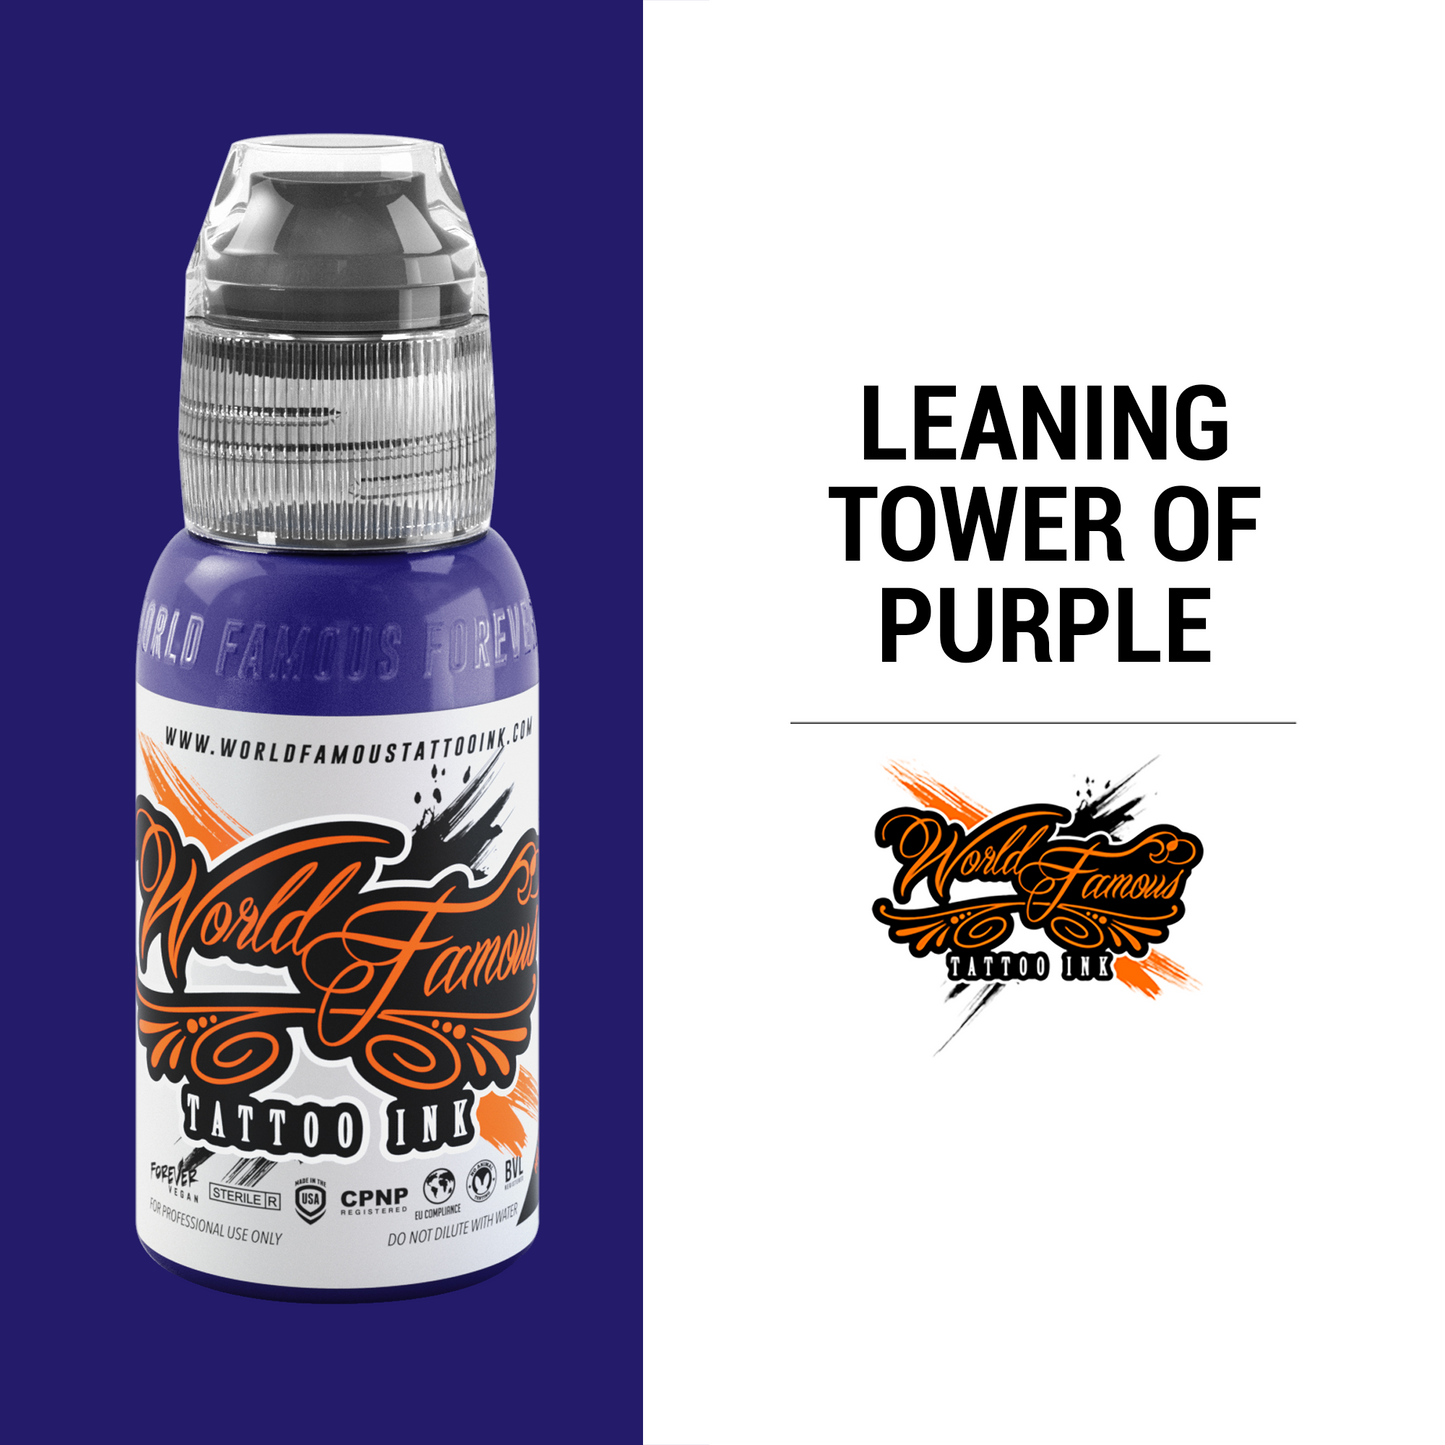 Leaning Tower of Purple | World Famous Tattoo Ink